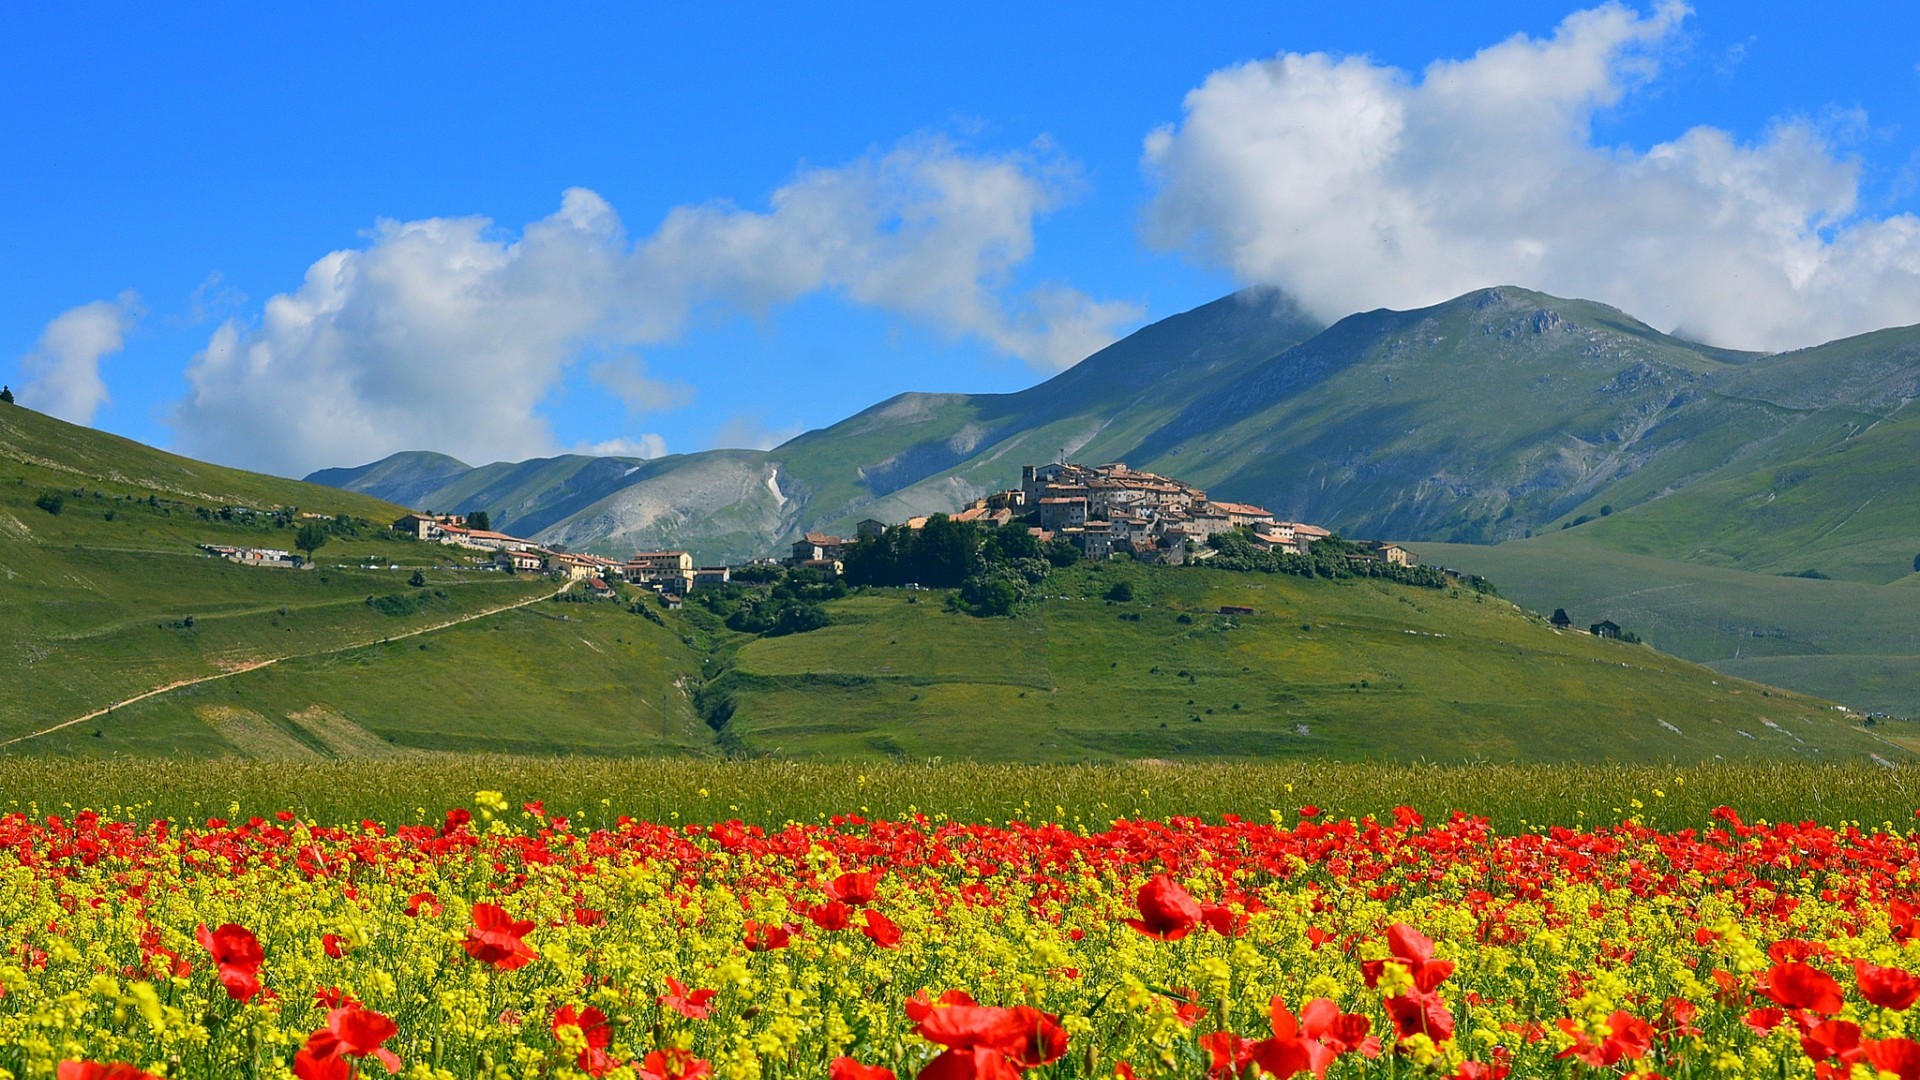 General 1920x1080 nature landscape clouds trees Italy architecture castle hills ancient mountains old building village field flowers grass poppies path summer